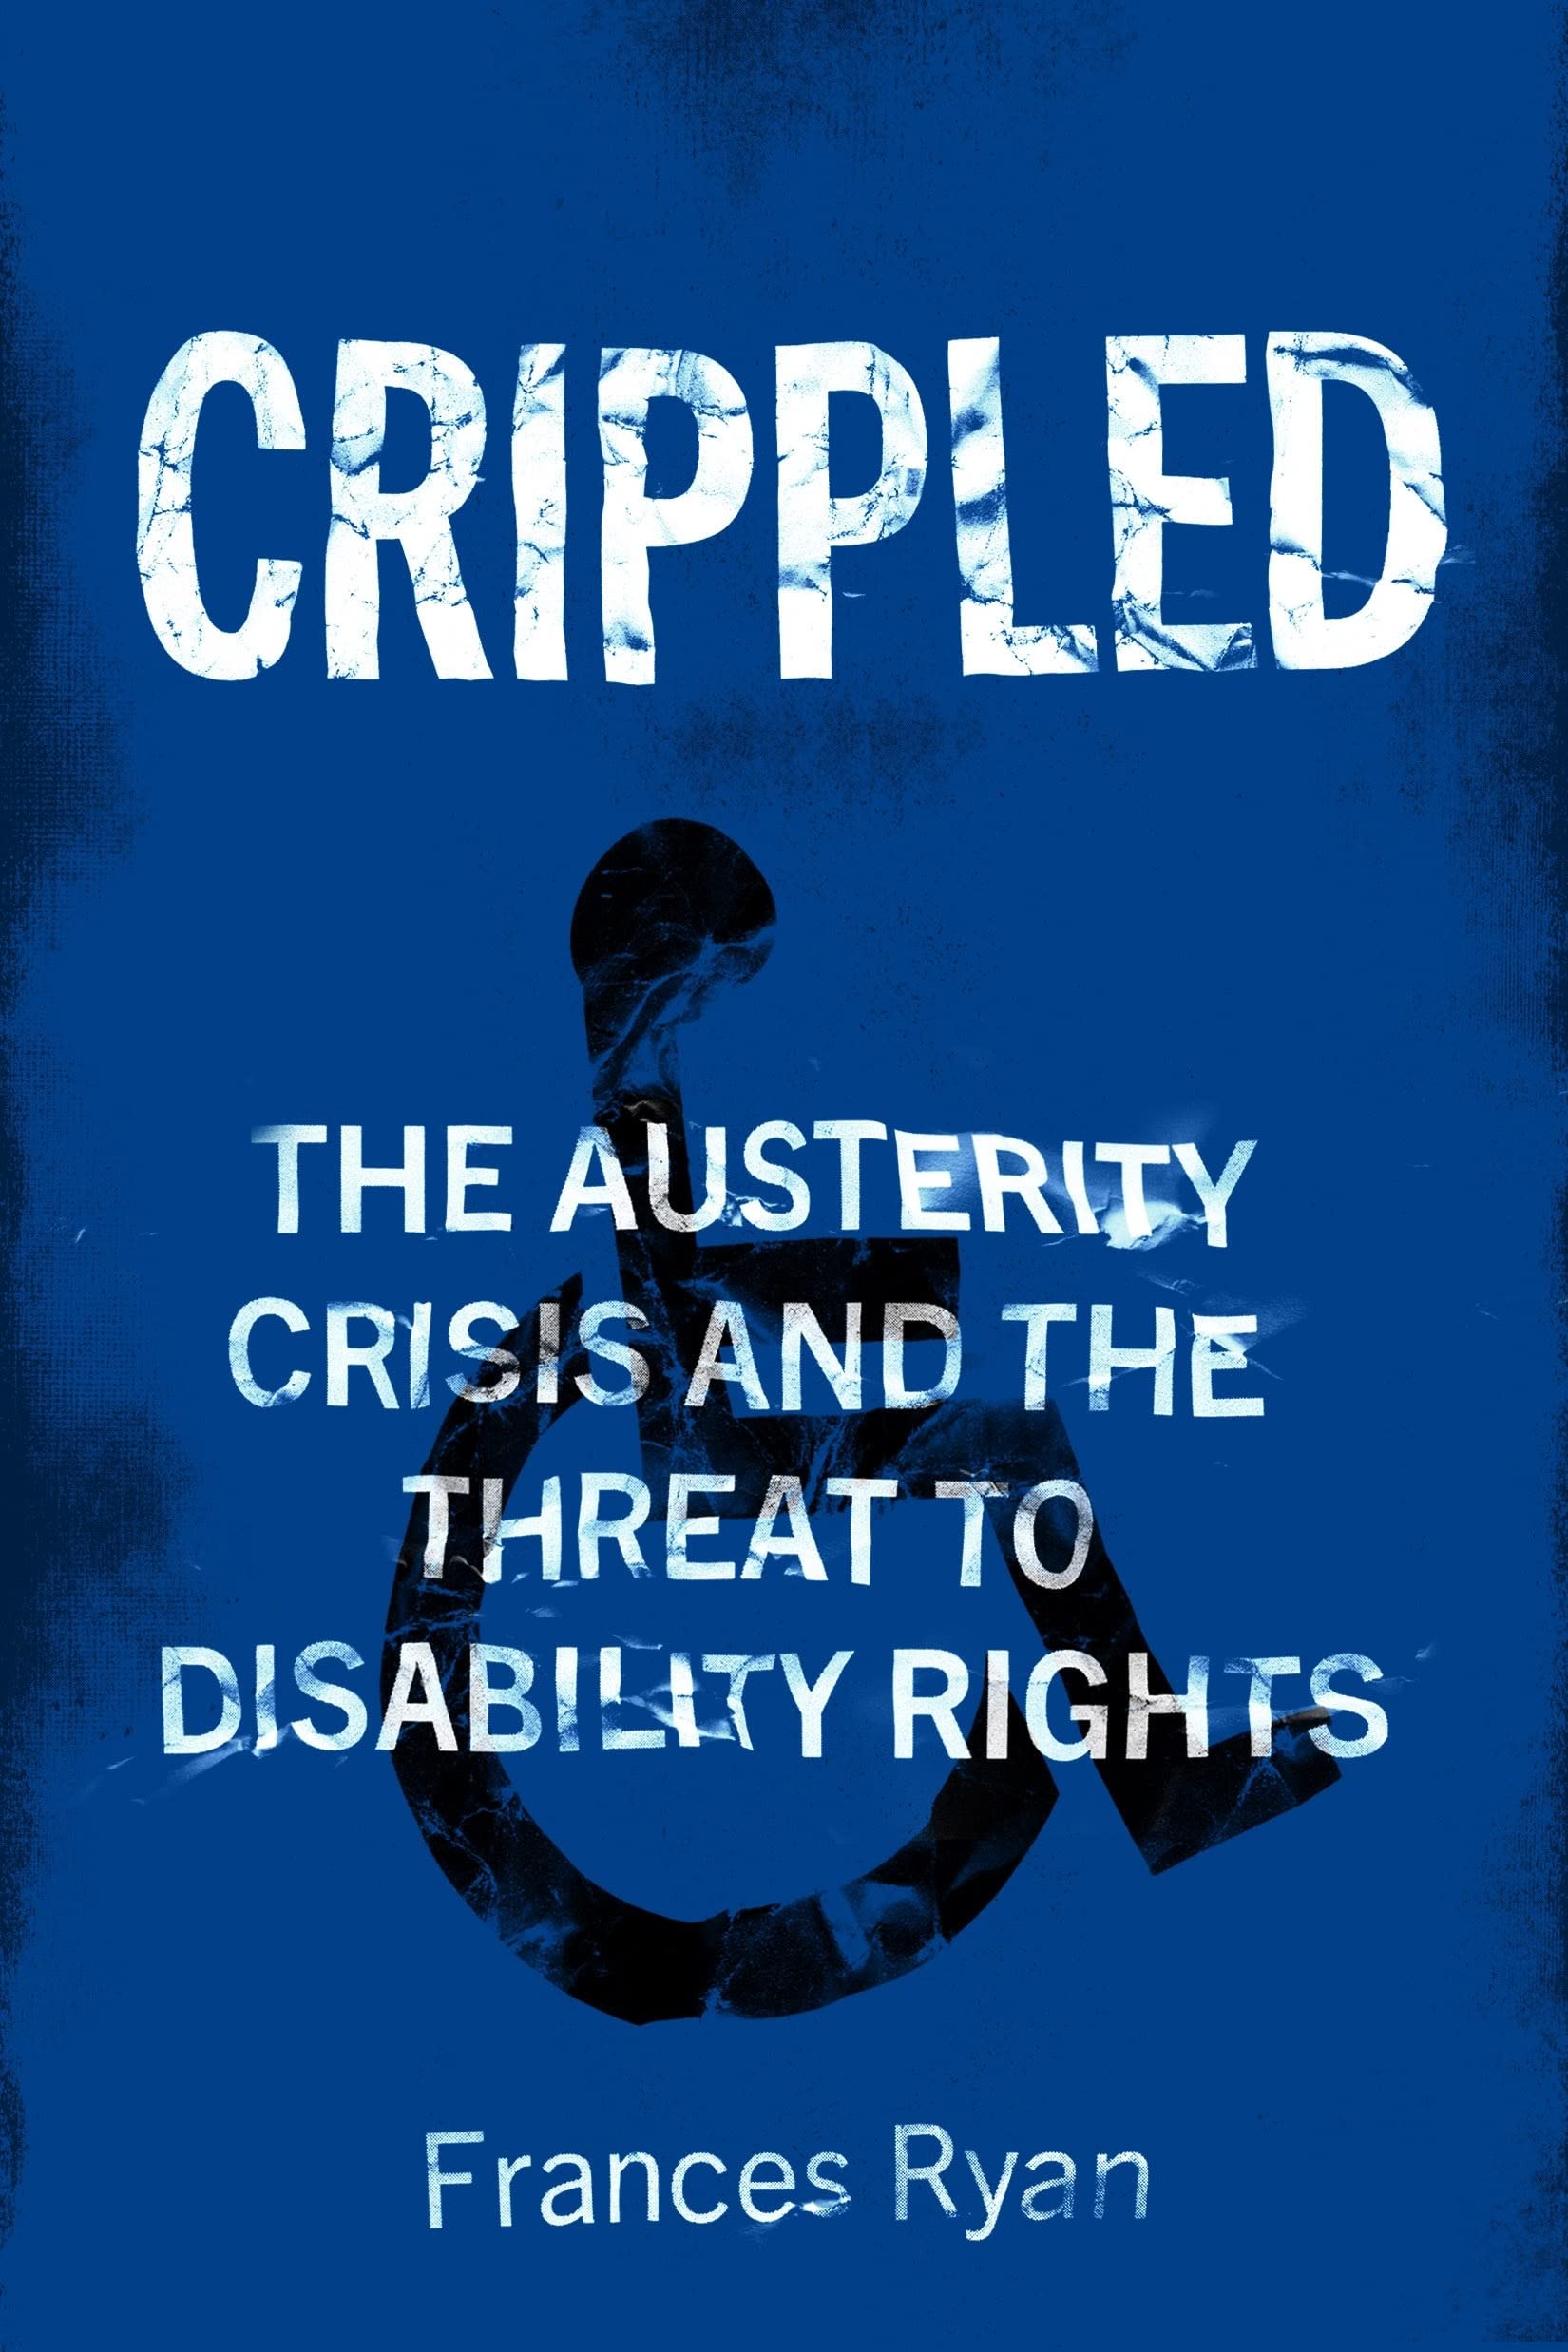 Book cover for Crippled : The Austerity Crisis and the Threat to Disability Rights by Frances Ryan featuring a decayed-style wheelchair symbol on a blue background